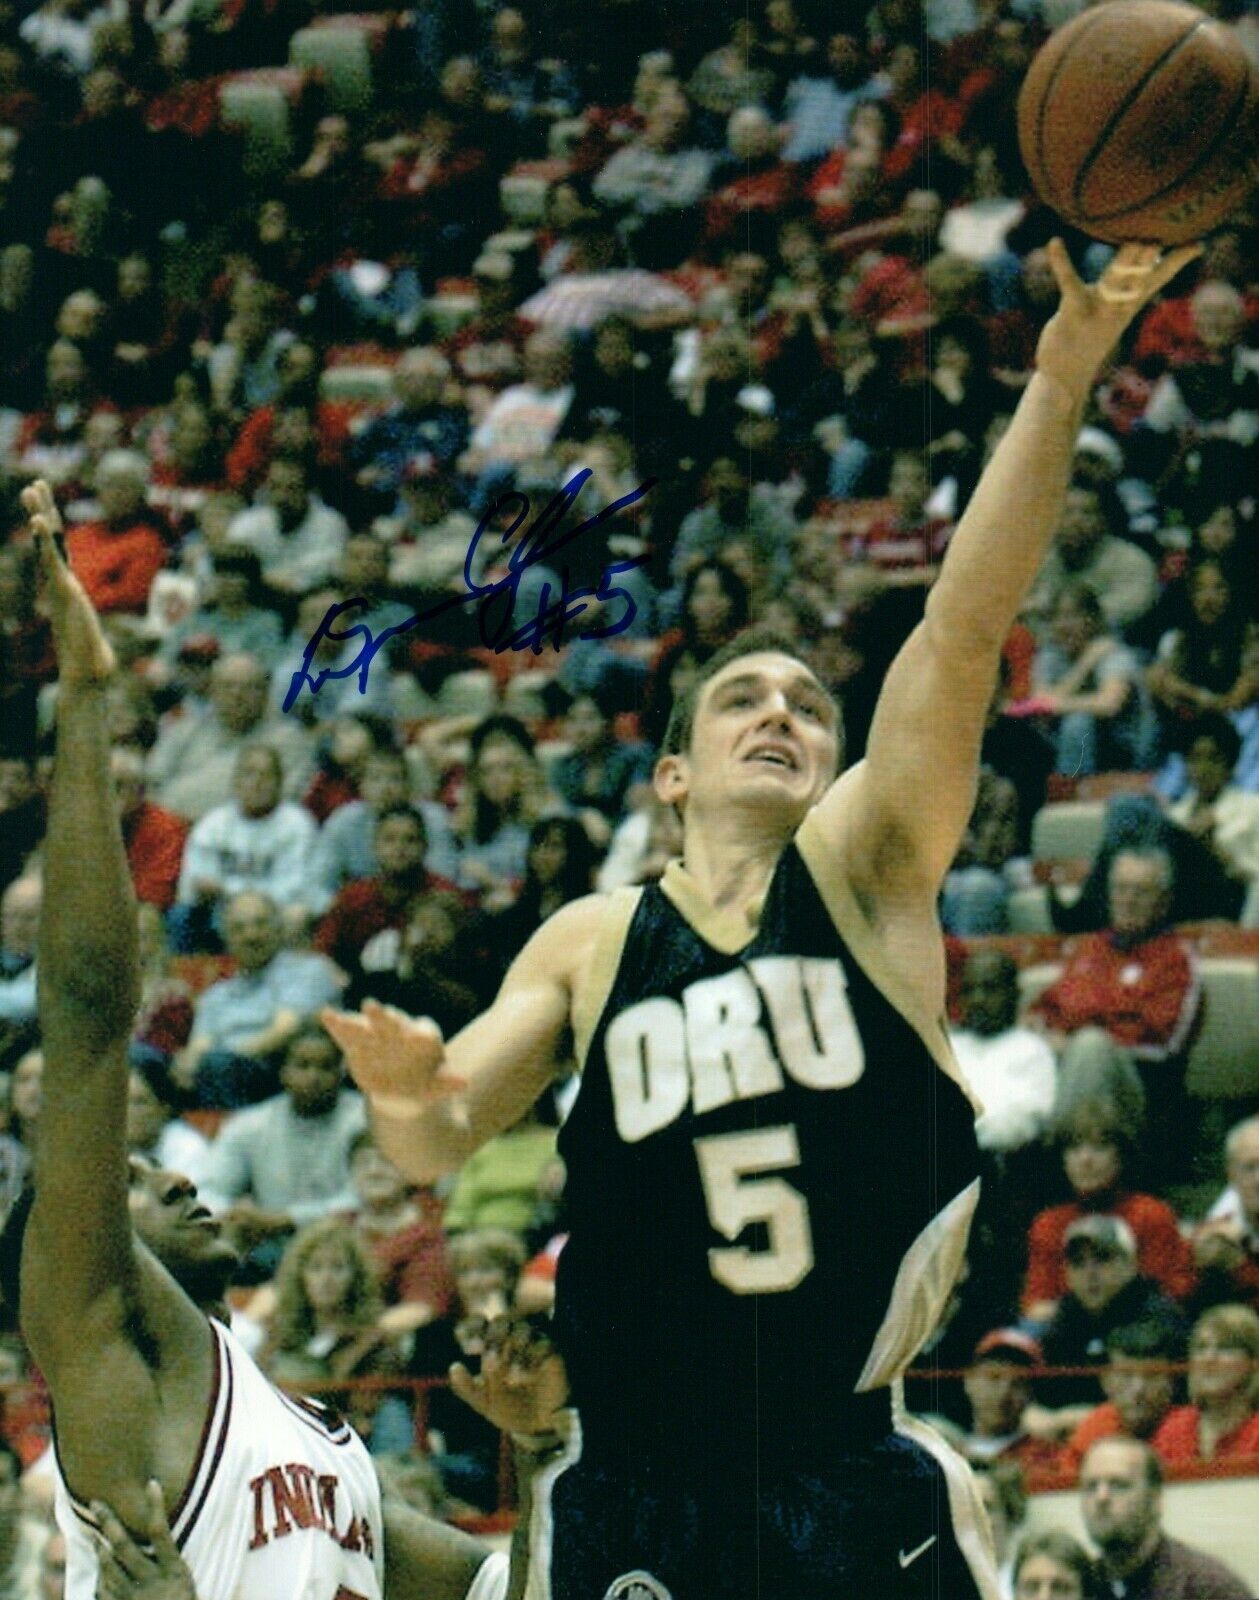 Luke Spencer Gardner NCAA College Oral Roberts Hand Signed Autograph 8x10 Photo Poster painting